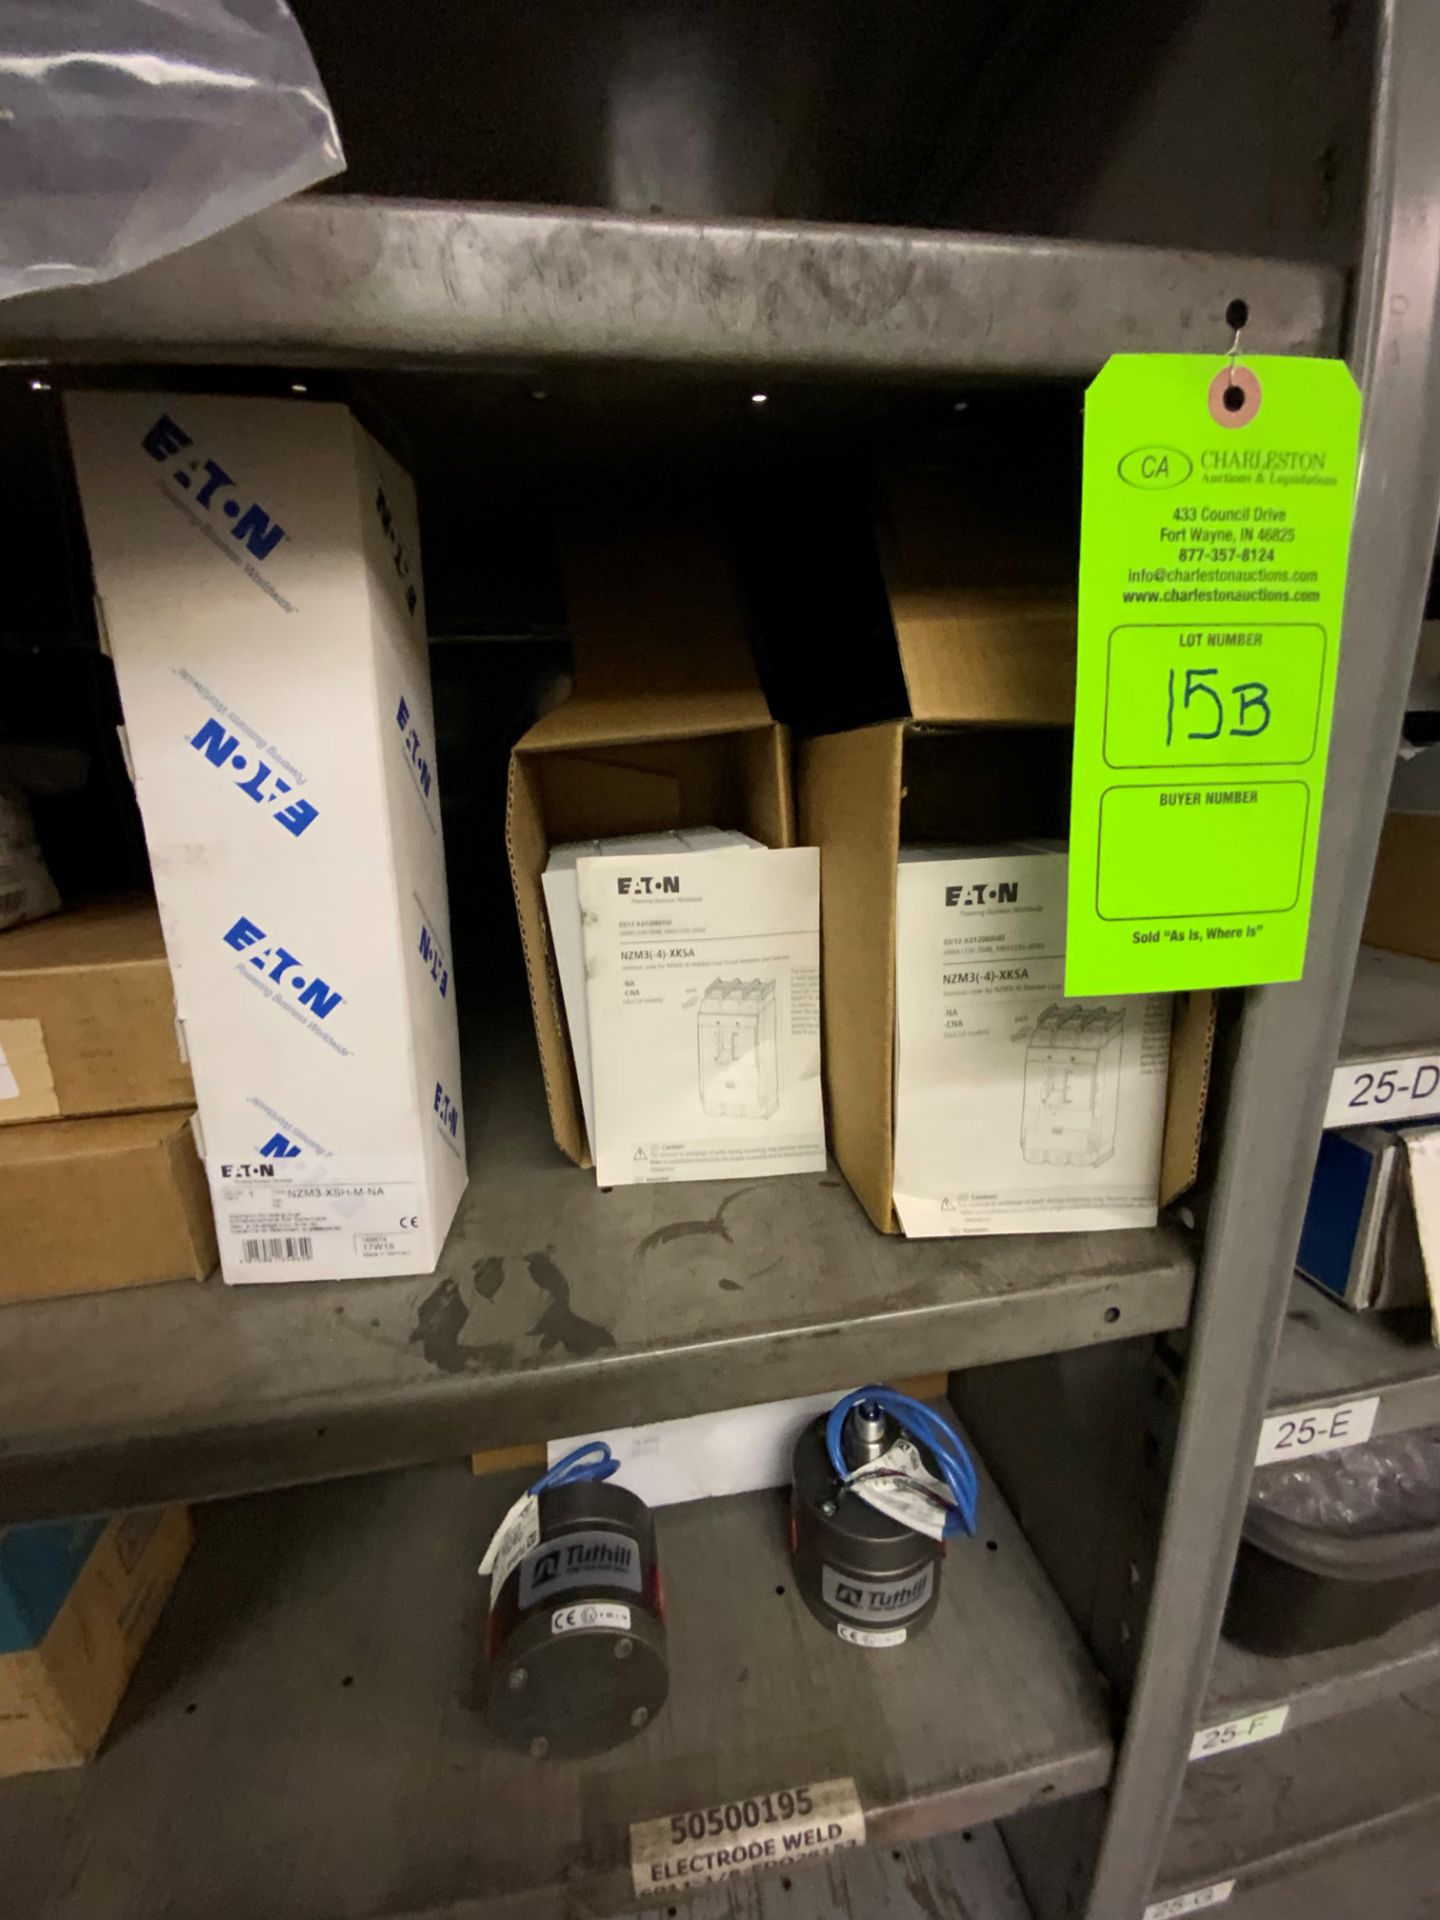 CONTENTS OF RACK: MASA SPARE PARTS - EATON & TUTHILL BREAKERS; METERS & MASA CPUT SYSTEM - SEE